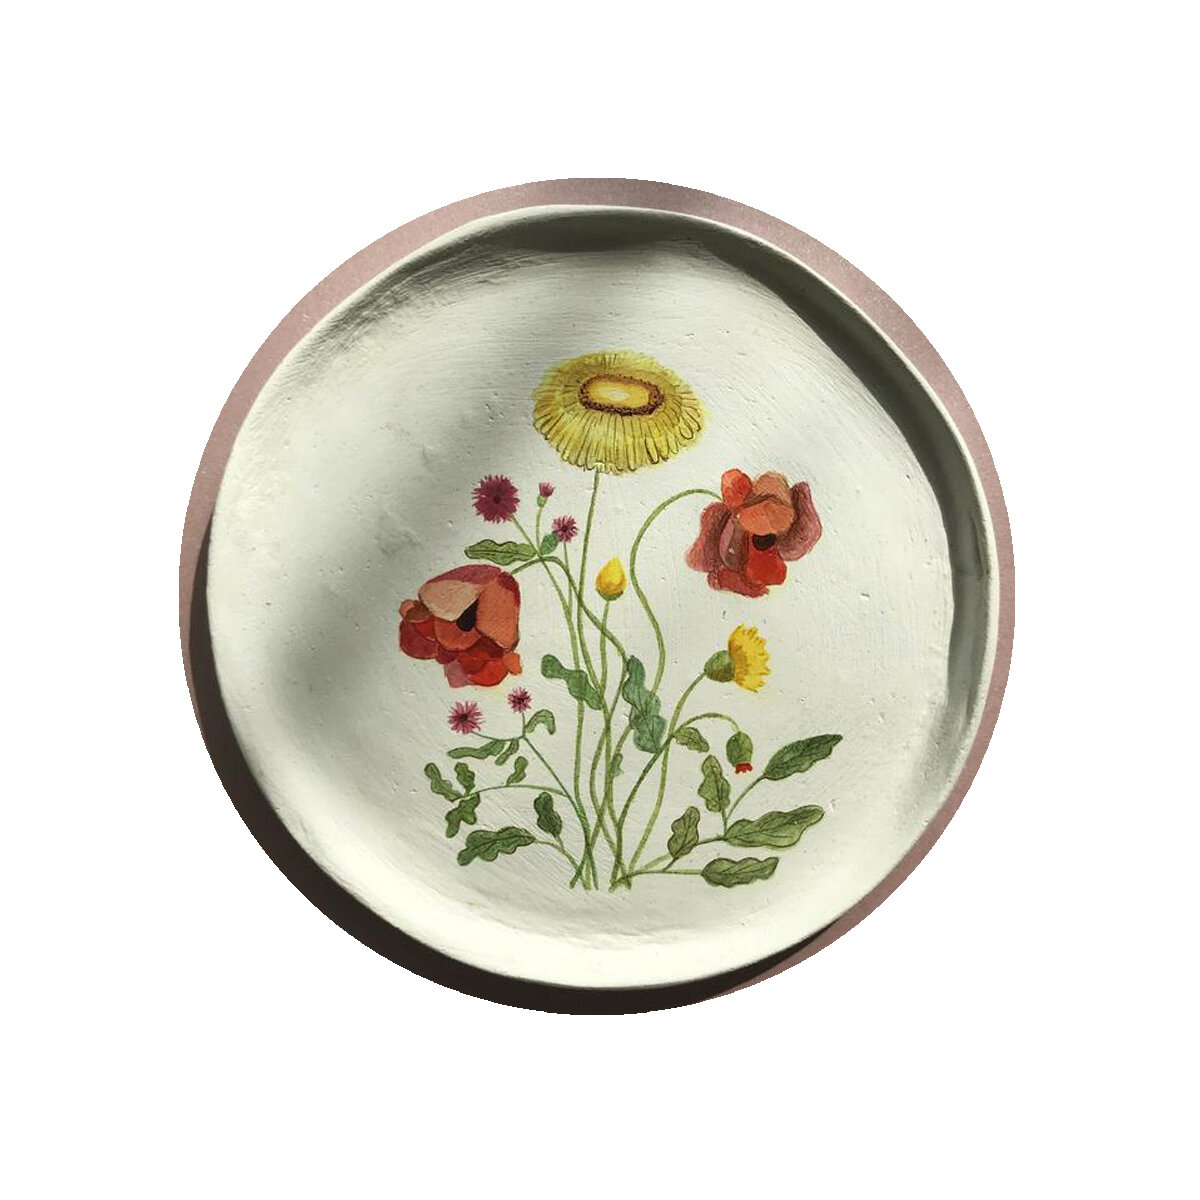 CLAY PLATE WITH FLORAL DRAWING